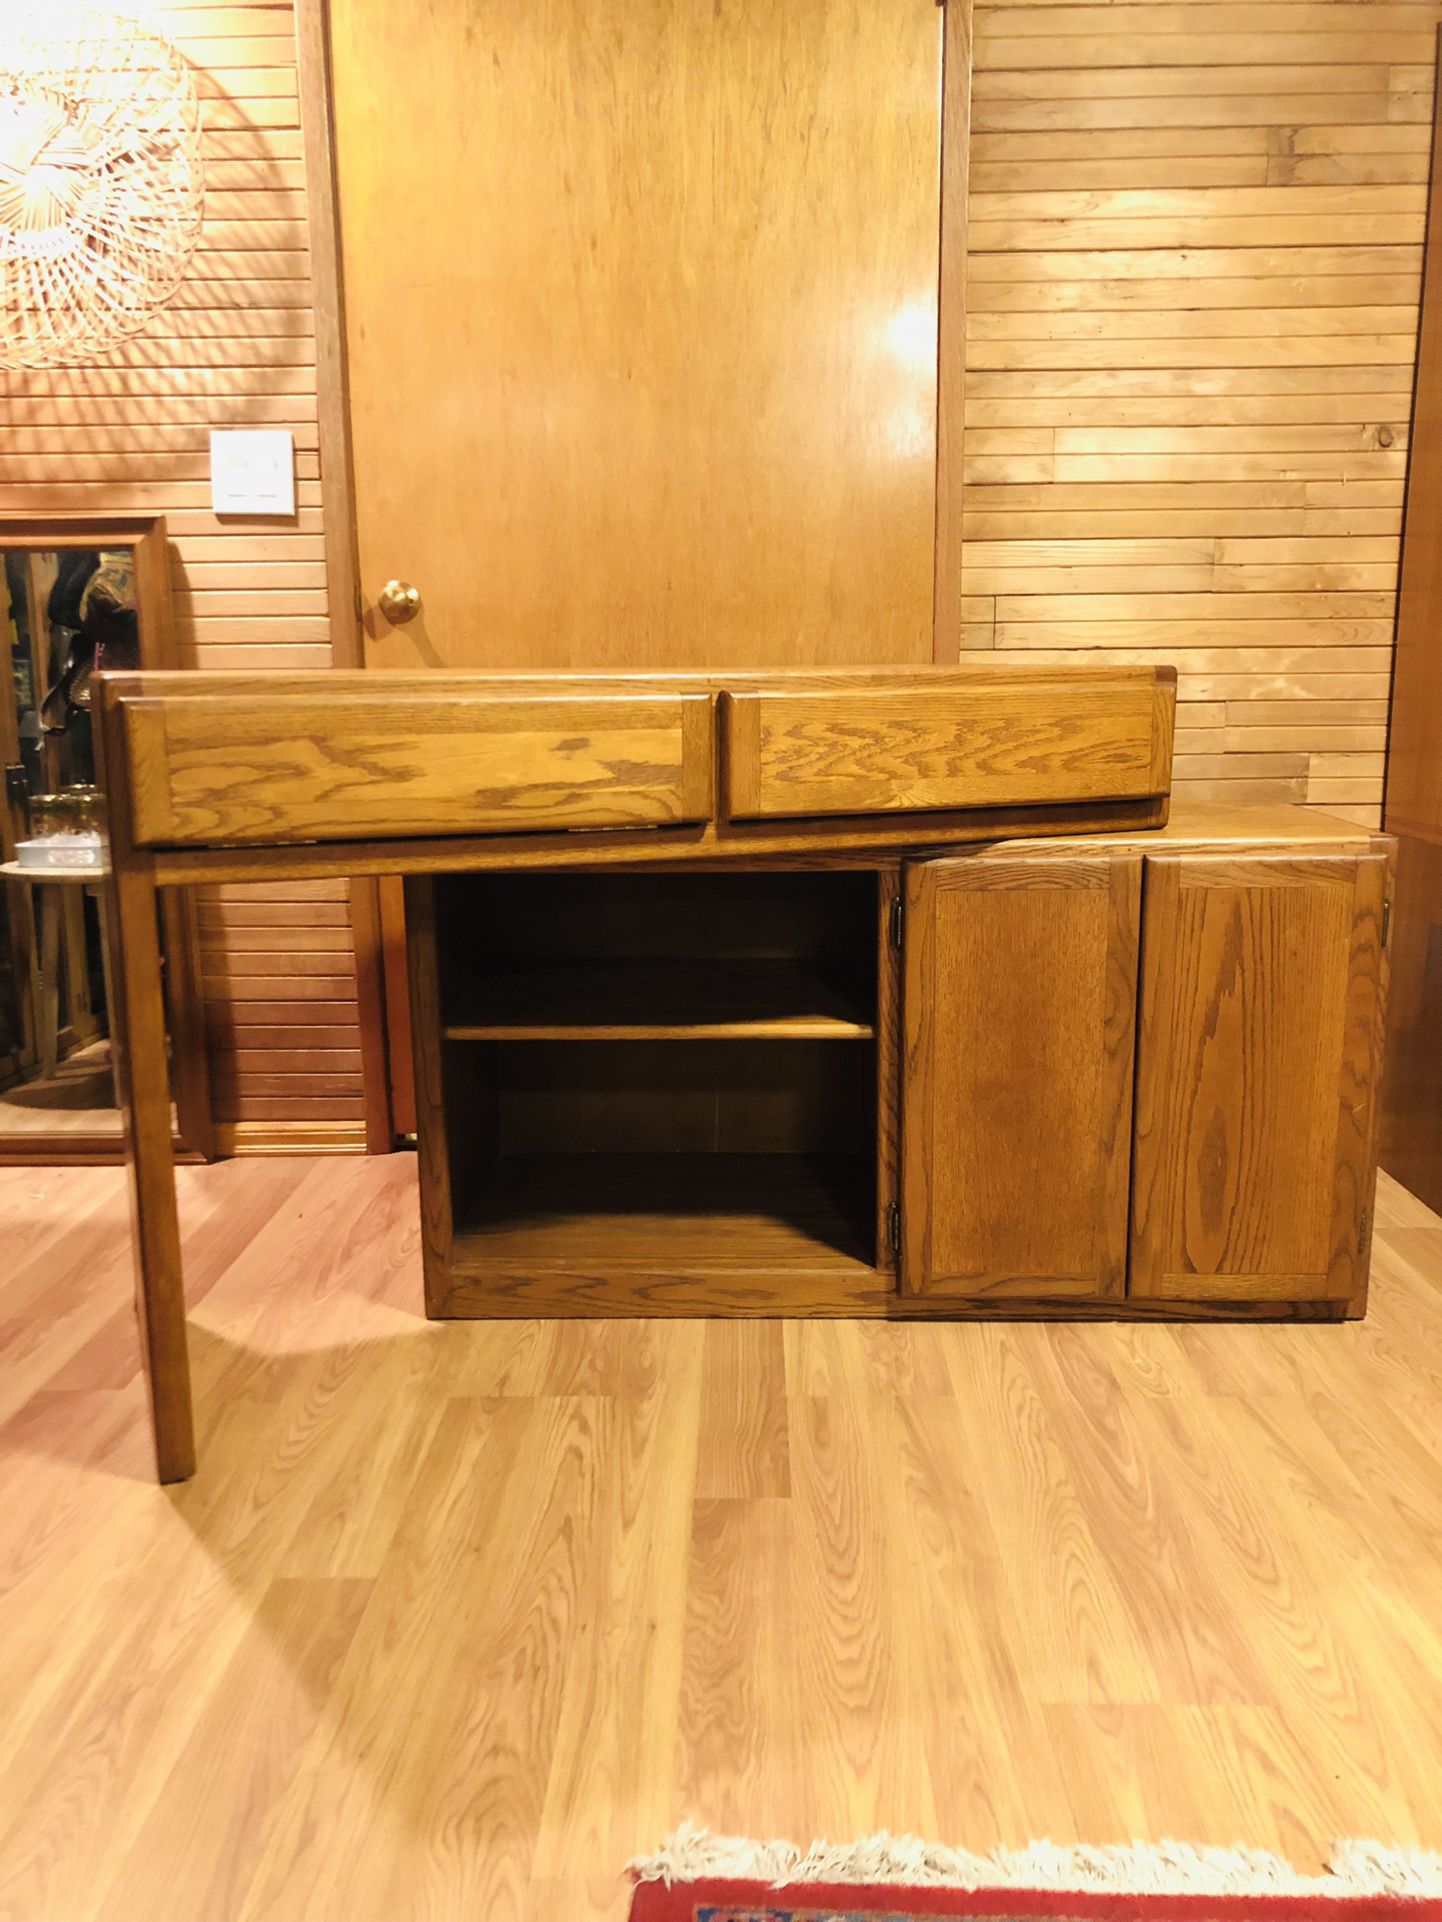 Vintage Retro Convertible Desk Storage Buffet Cabinet With Keyboard Cubby 48.5”w X 20”d X 32”.25”h